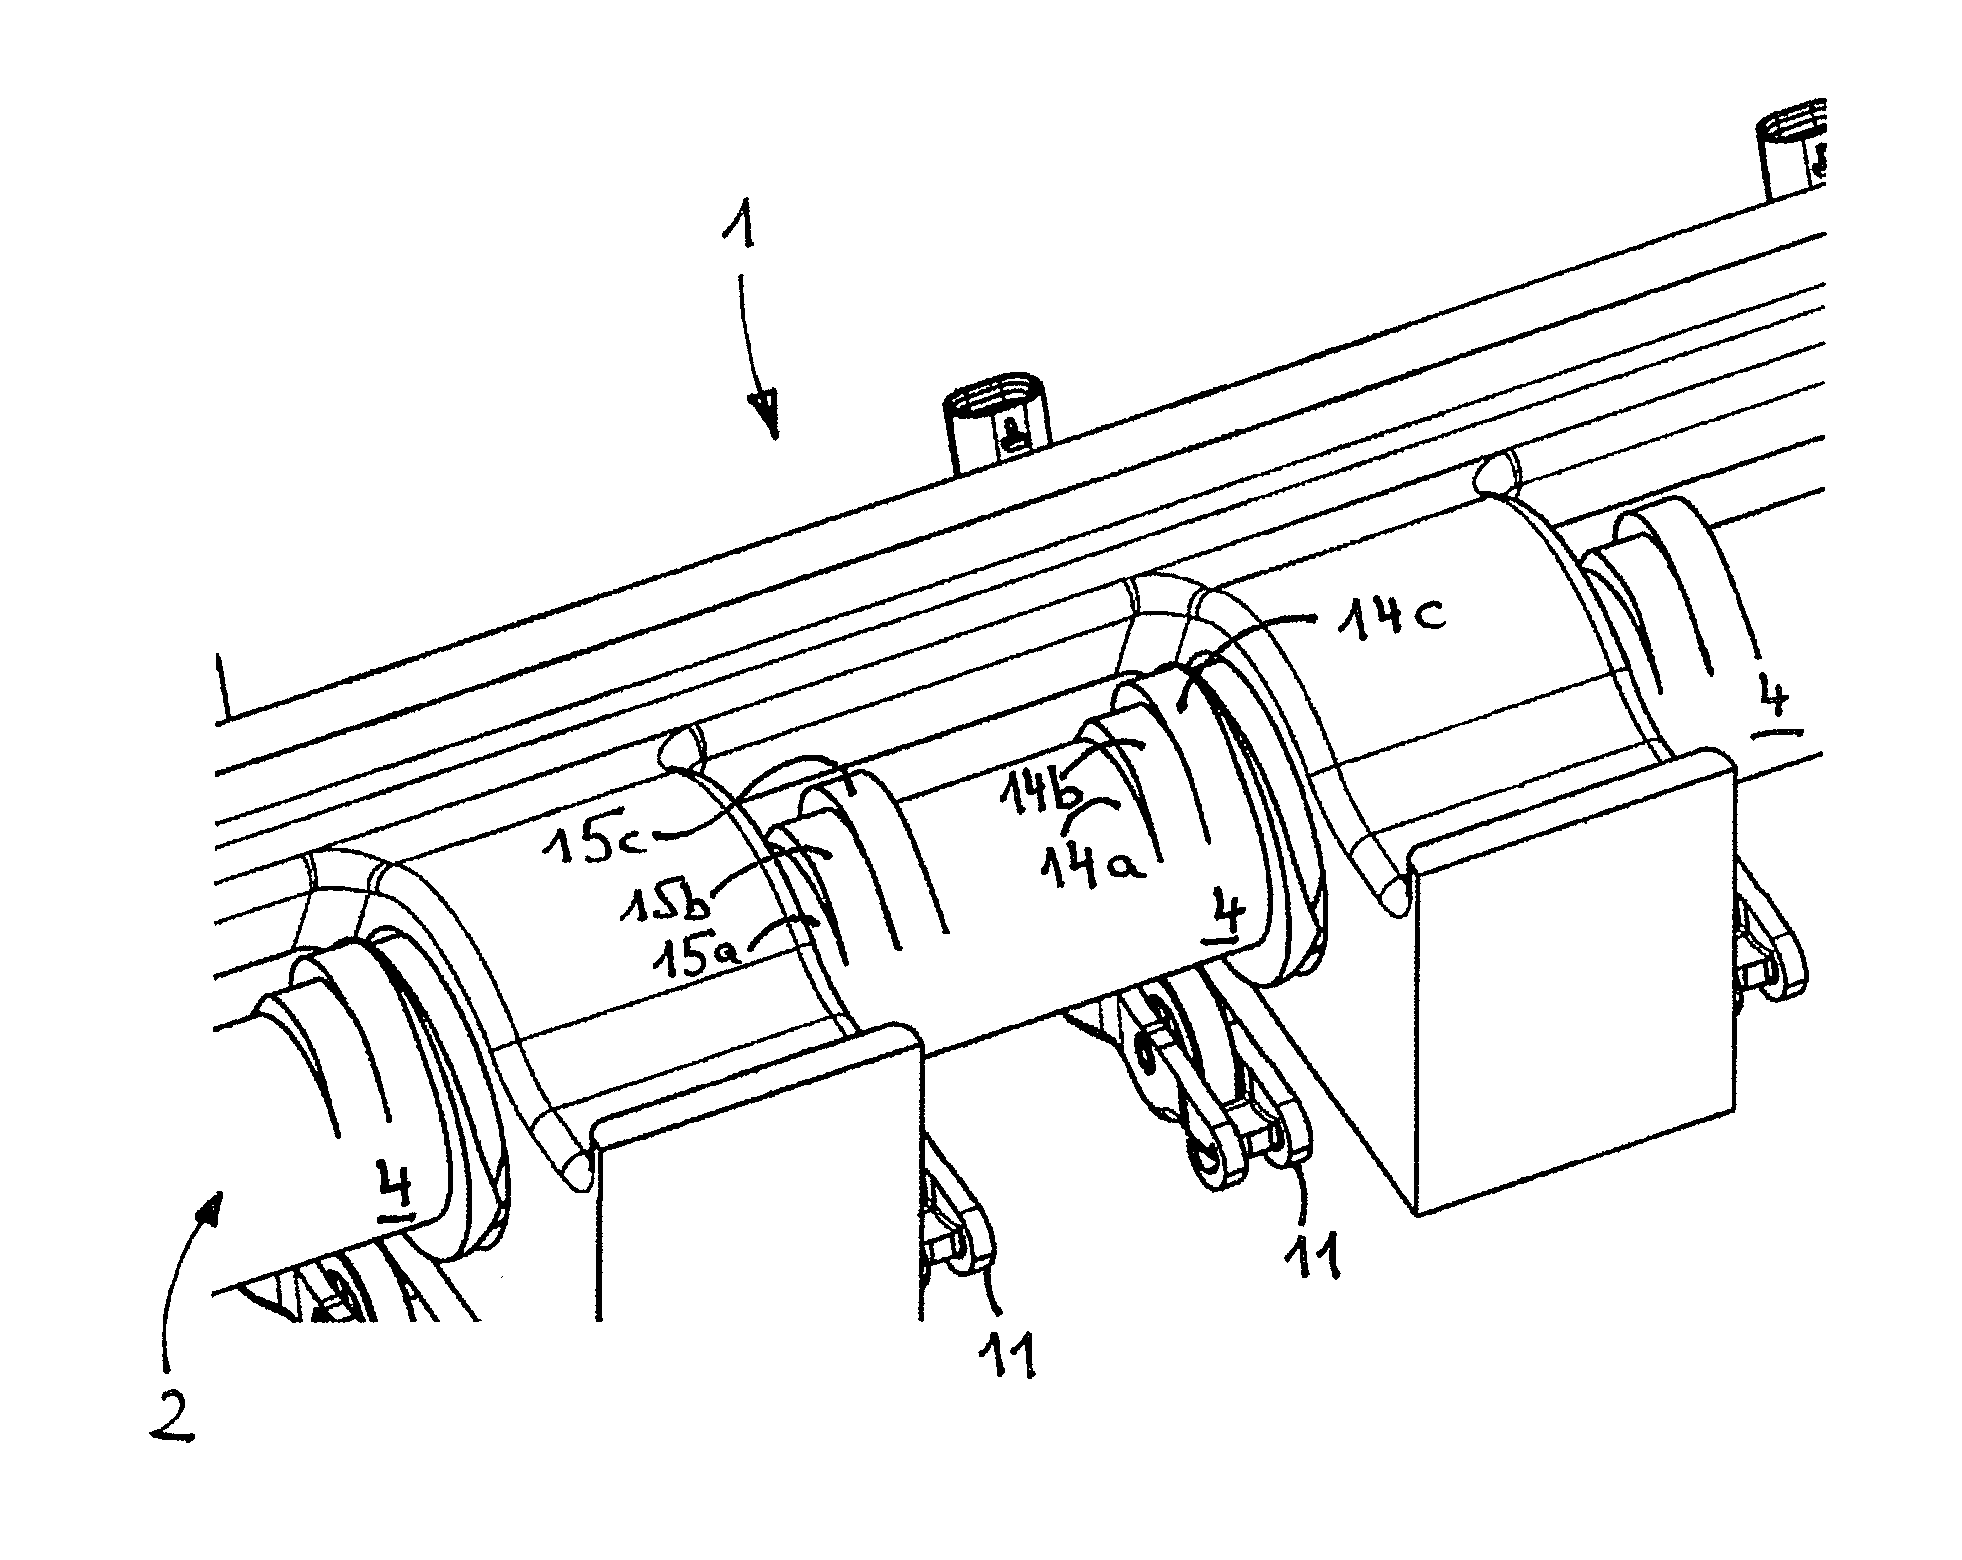 Valve drive of an internal combustion engine